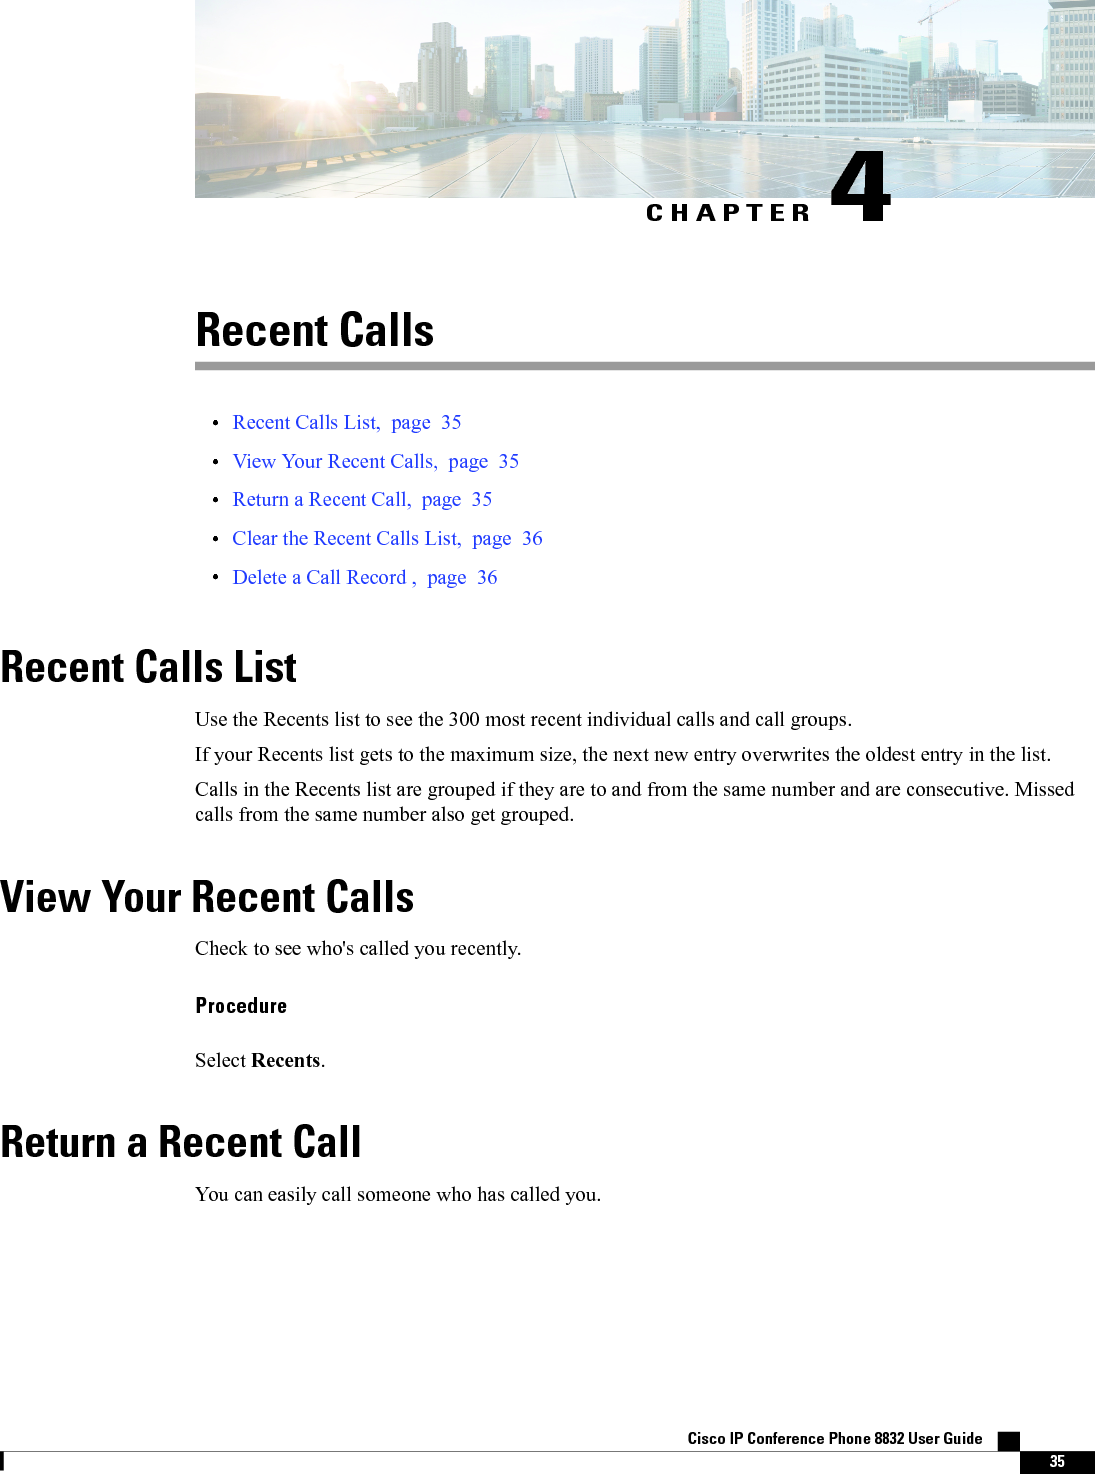 CHAPTER 4Recent Calls•Recent Calls List, page 35•View Your Recent Calls, page 35•Return a Recent Call, page 35•Clear the Recent Calls List, page 36•Delete a Call Record , page 36Recent Calls ListUse the Recents list to see the 300 most recent individual calls and call groups.If your Recents list gets to the maximum size, the next new entry overwrites the oldest entry in the list.Calls in the Recents list are grouped if they are to and from the same number and are consecutive. Missedcalls from the same number also get grouped.View Your Recent CallsCheck to see who&apos;s called you recently.ProcedureSelect Recents.Return a Recent CallYou can easily call someone who has called you.Cisco IP Conference Phone 8832 User Guide    35